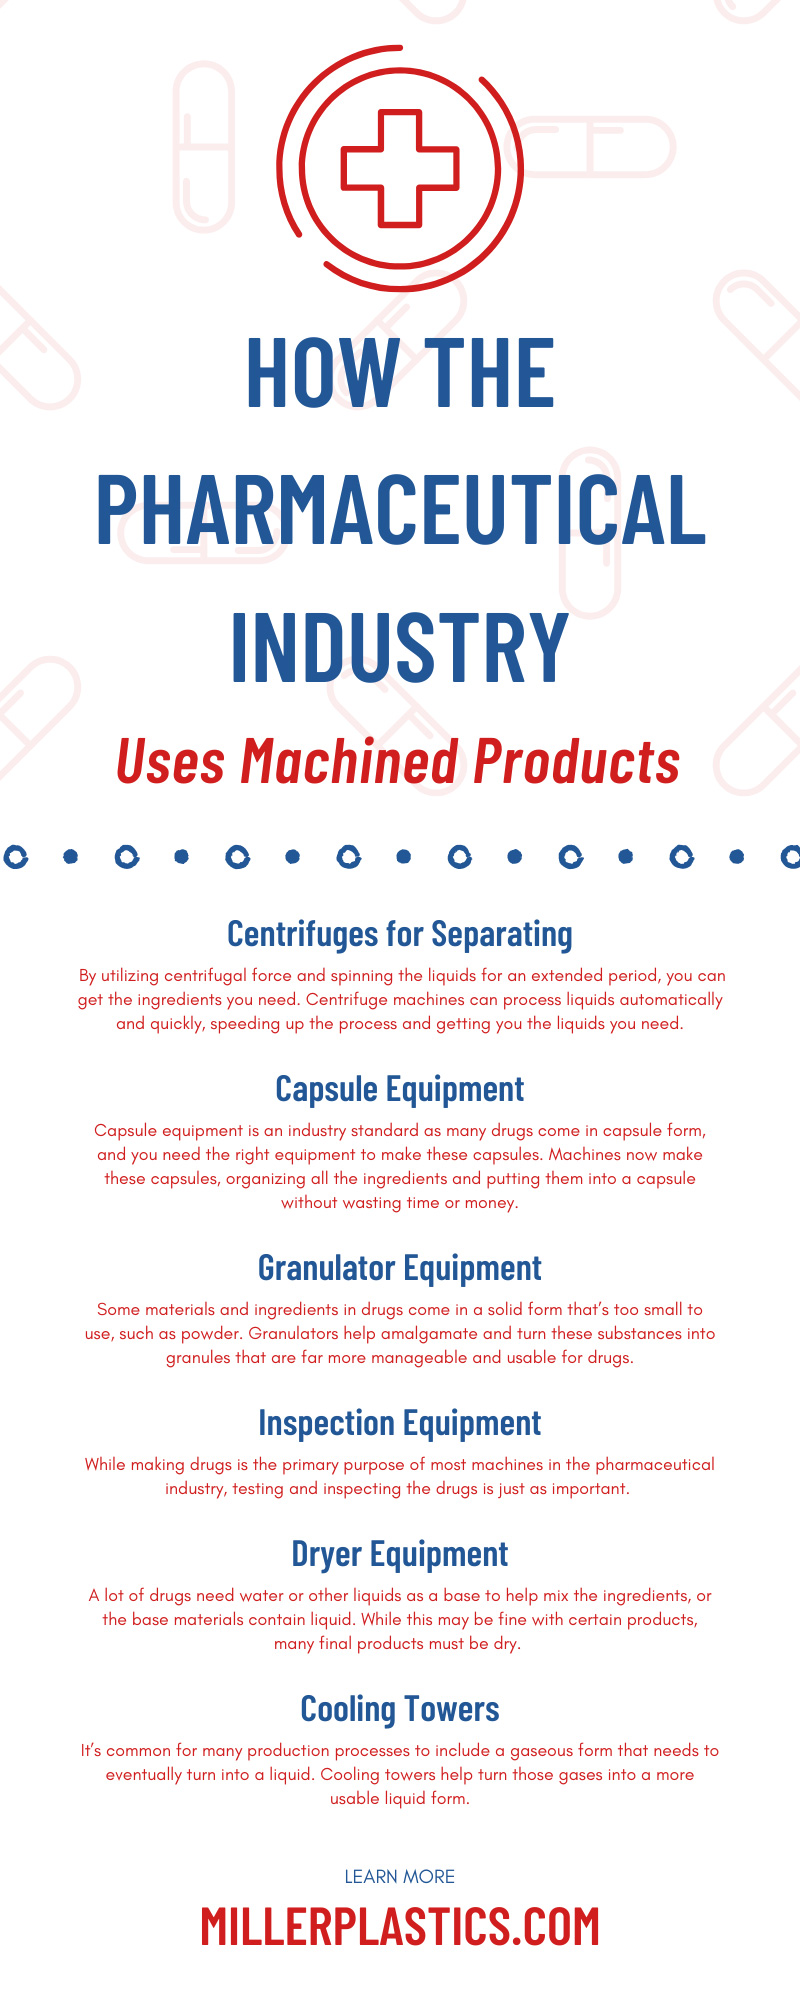 How the Pharmaceutical Industry Uses Machined Products